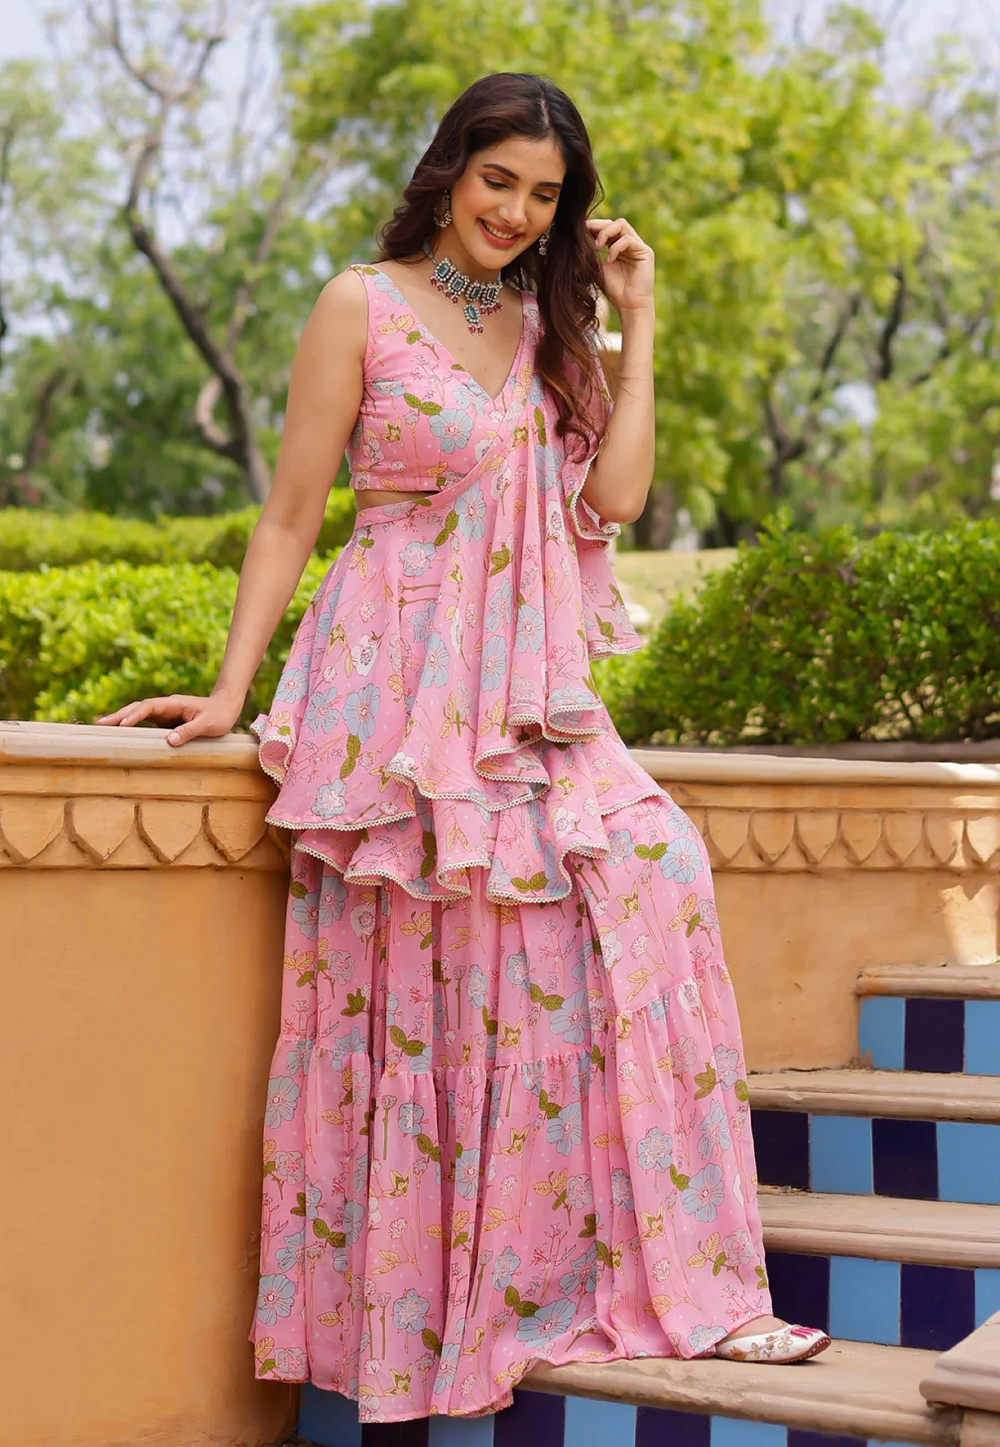 Floral Printed Georgette Top and Skirt Set in Pink with Shoulder Cape